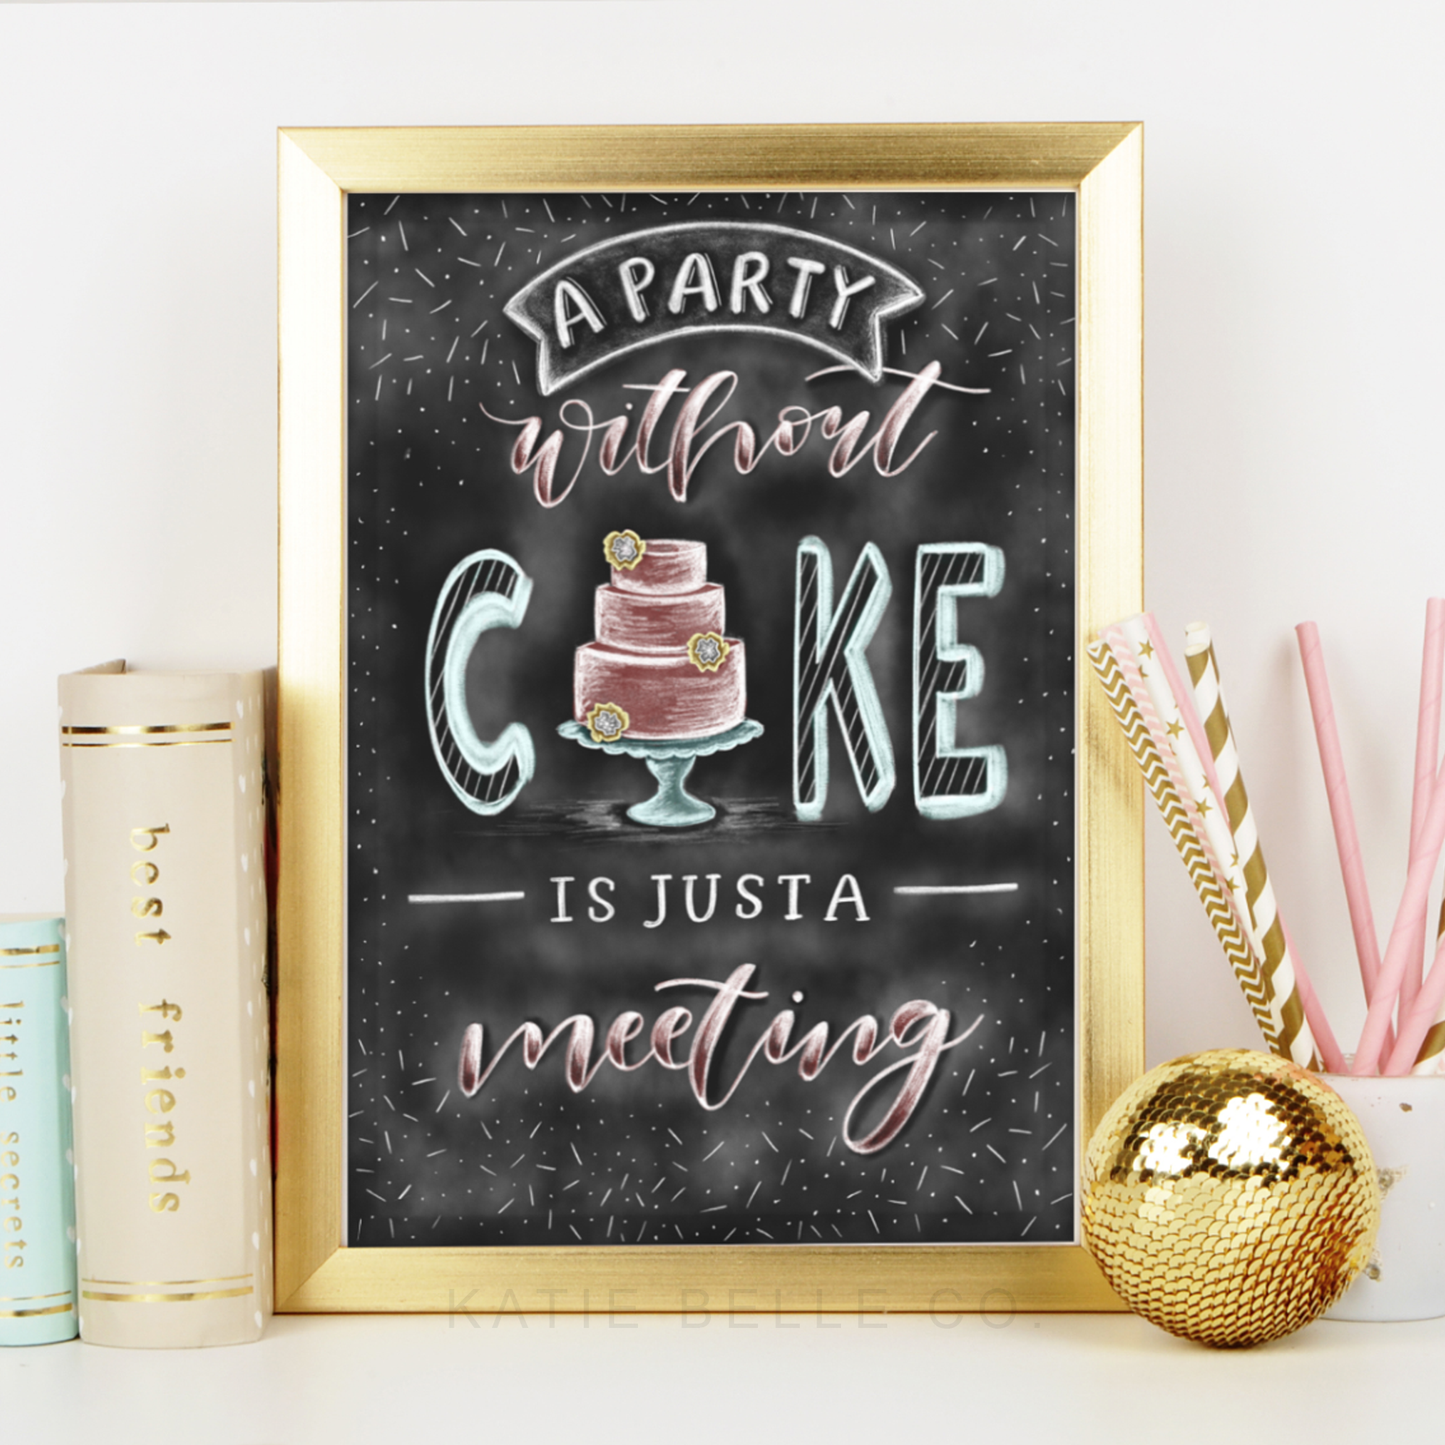 a party without cake is just a meeting. julia child quote. Pink cake design. Pastel pink and blue. gender revel party. Katie Belle Co. Chalkboard print. Chalk art. Hand lettered font. Frame not included. Cake with flowers. Birthday Bash